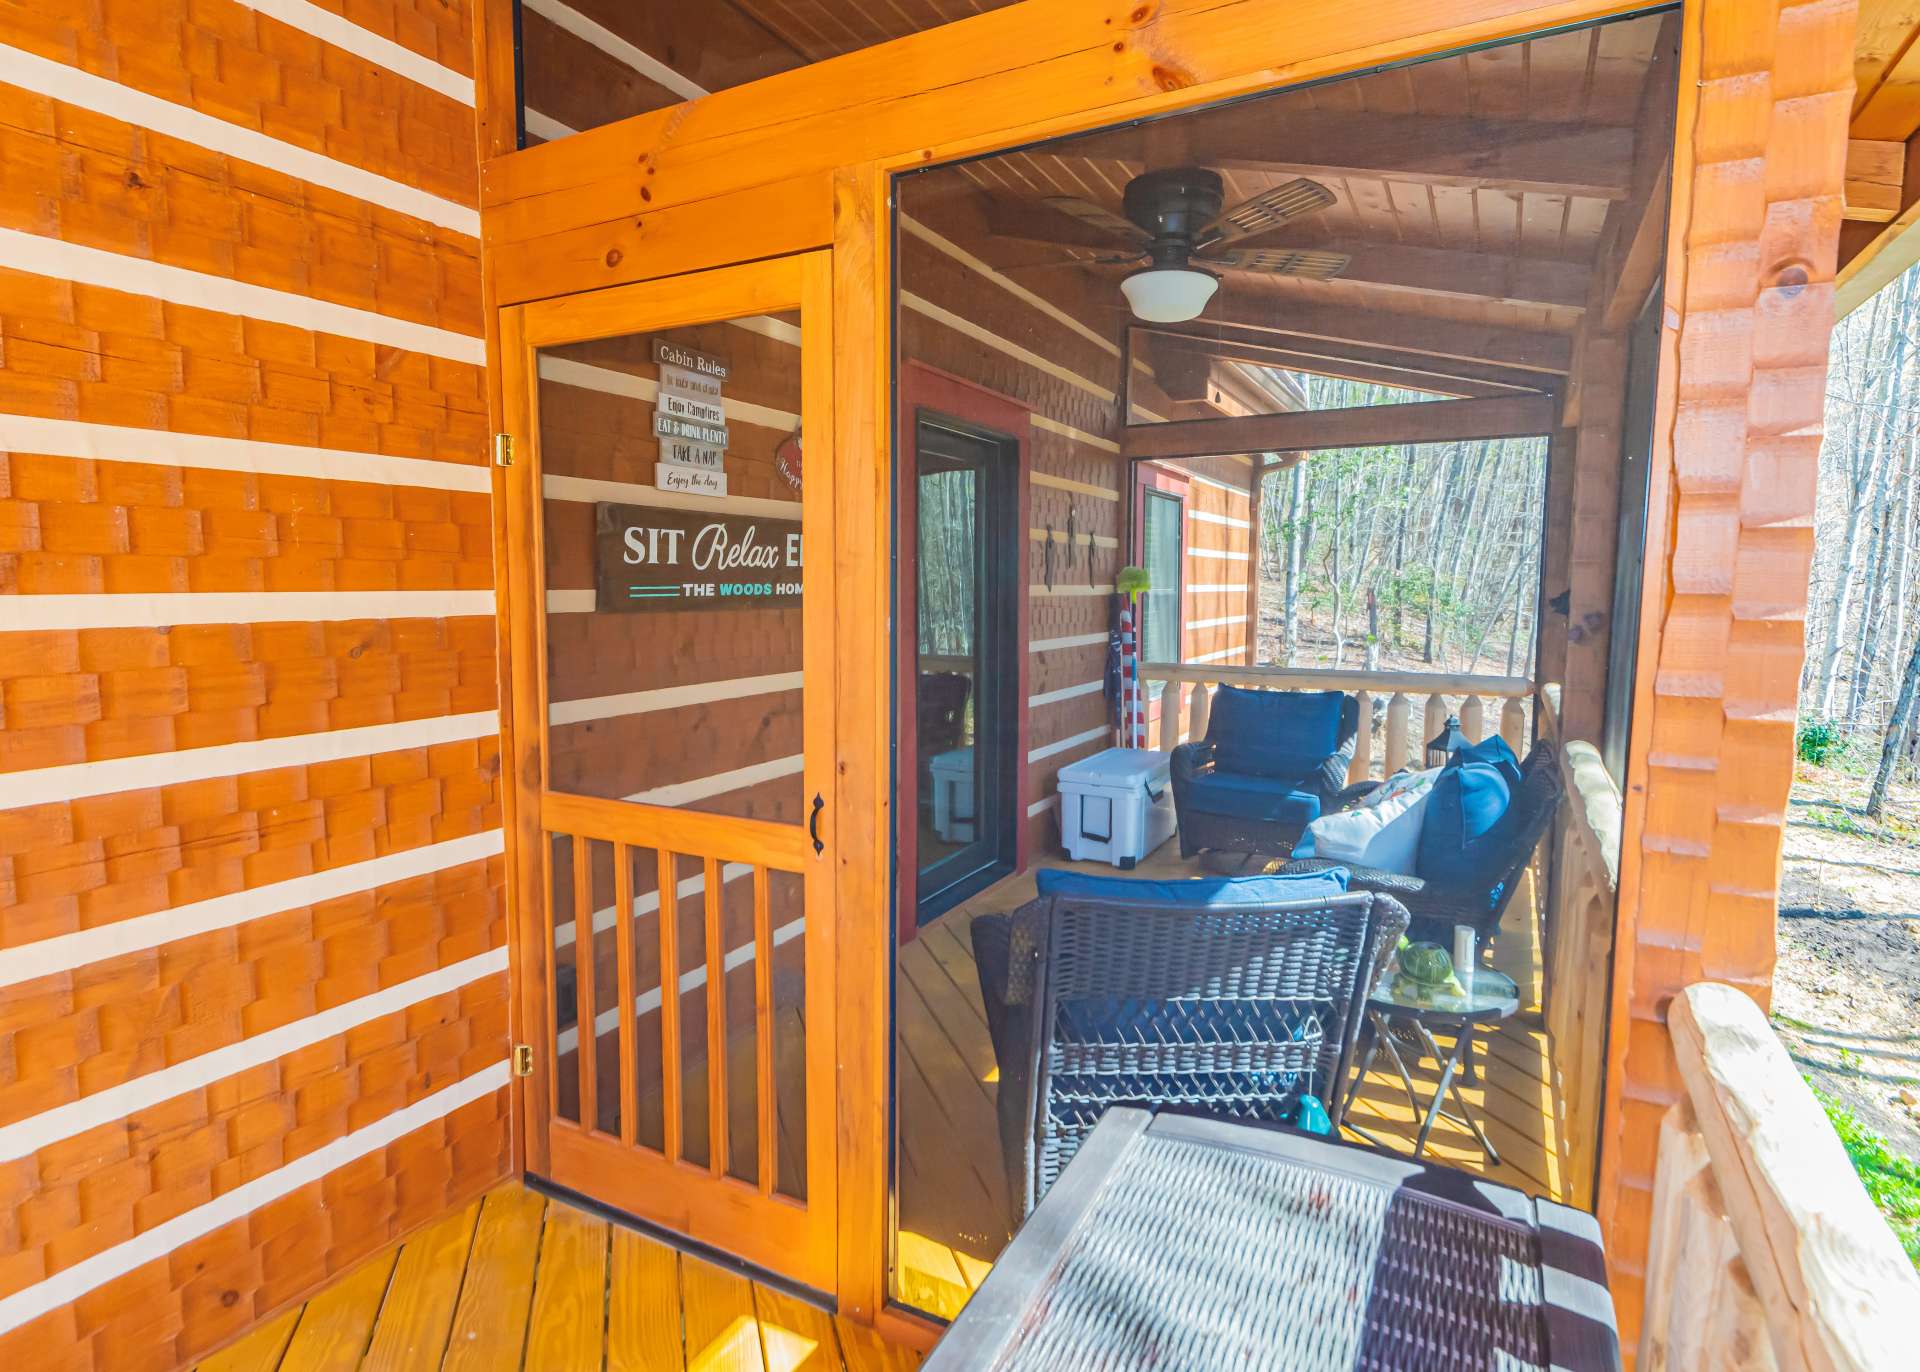 Offering additional outdoor entertaining or relaxation opportunities is the screened porch where you can enjoy a peaceful morning brunch or an afternoon get together with friends.